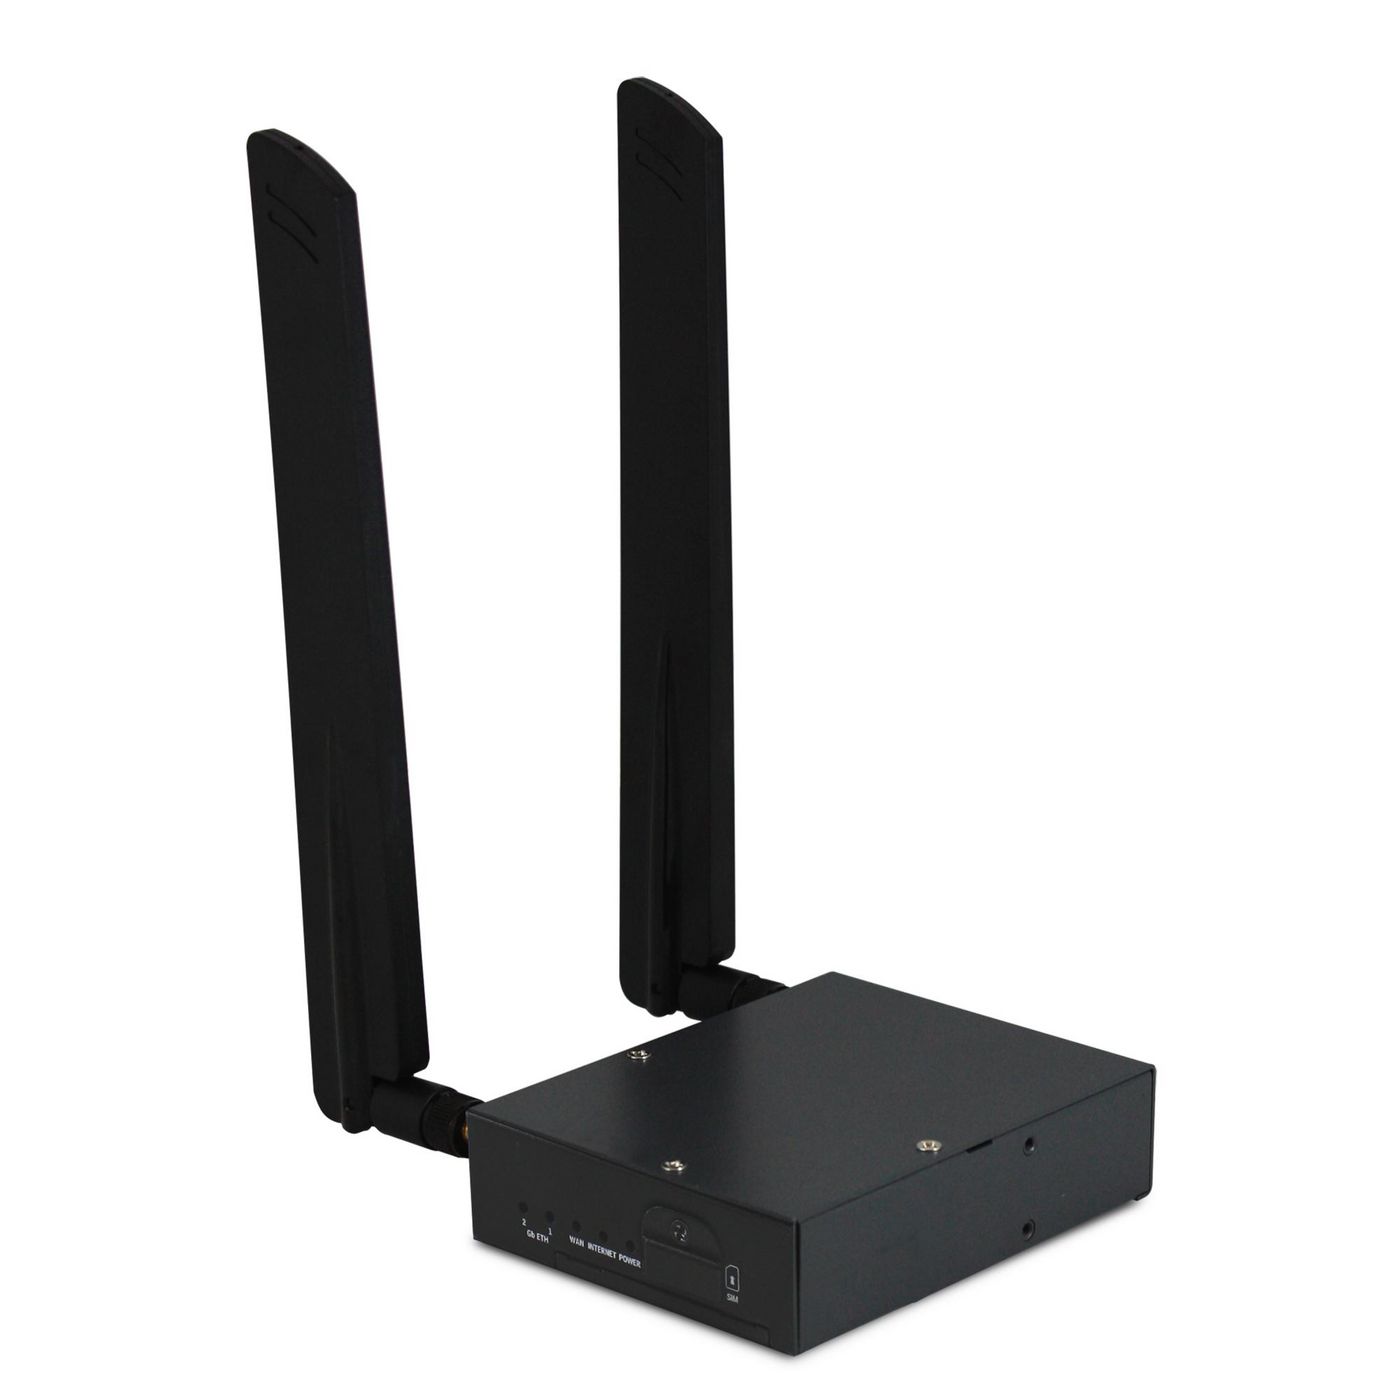 M150 JELT 4G LTE Industrial Router with